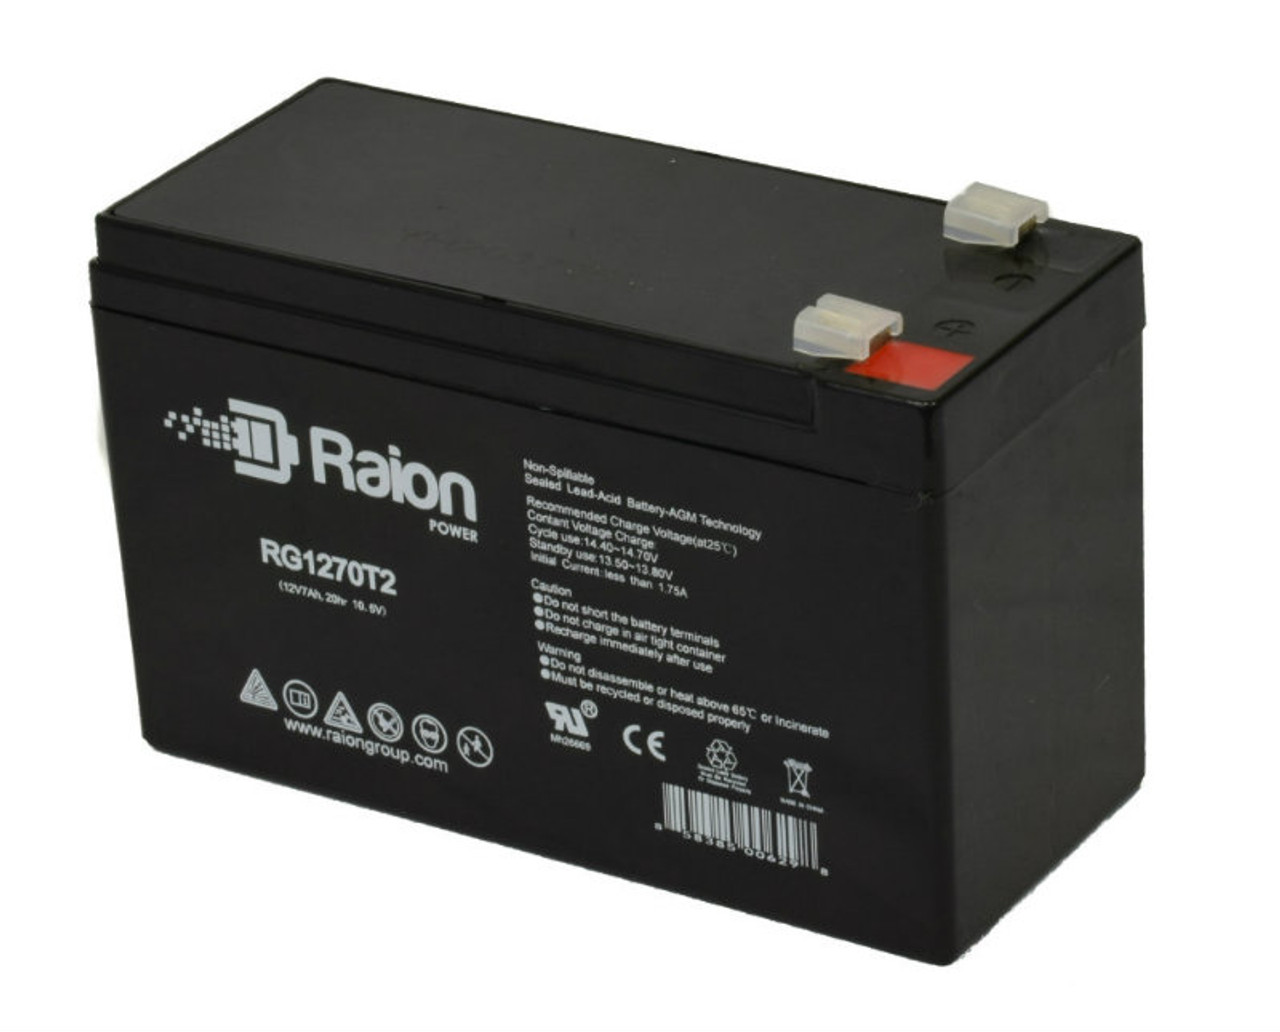 Raion Power Replacement 12V 7Ah RG1270T1 Fire Alarm Battery for Altronix SMP10PM12P4CB